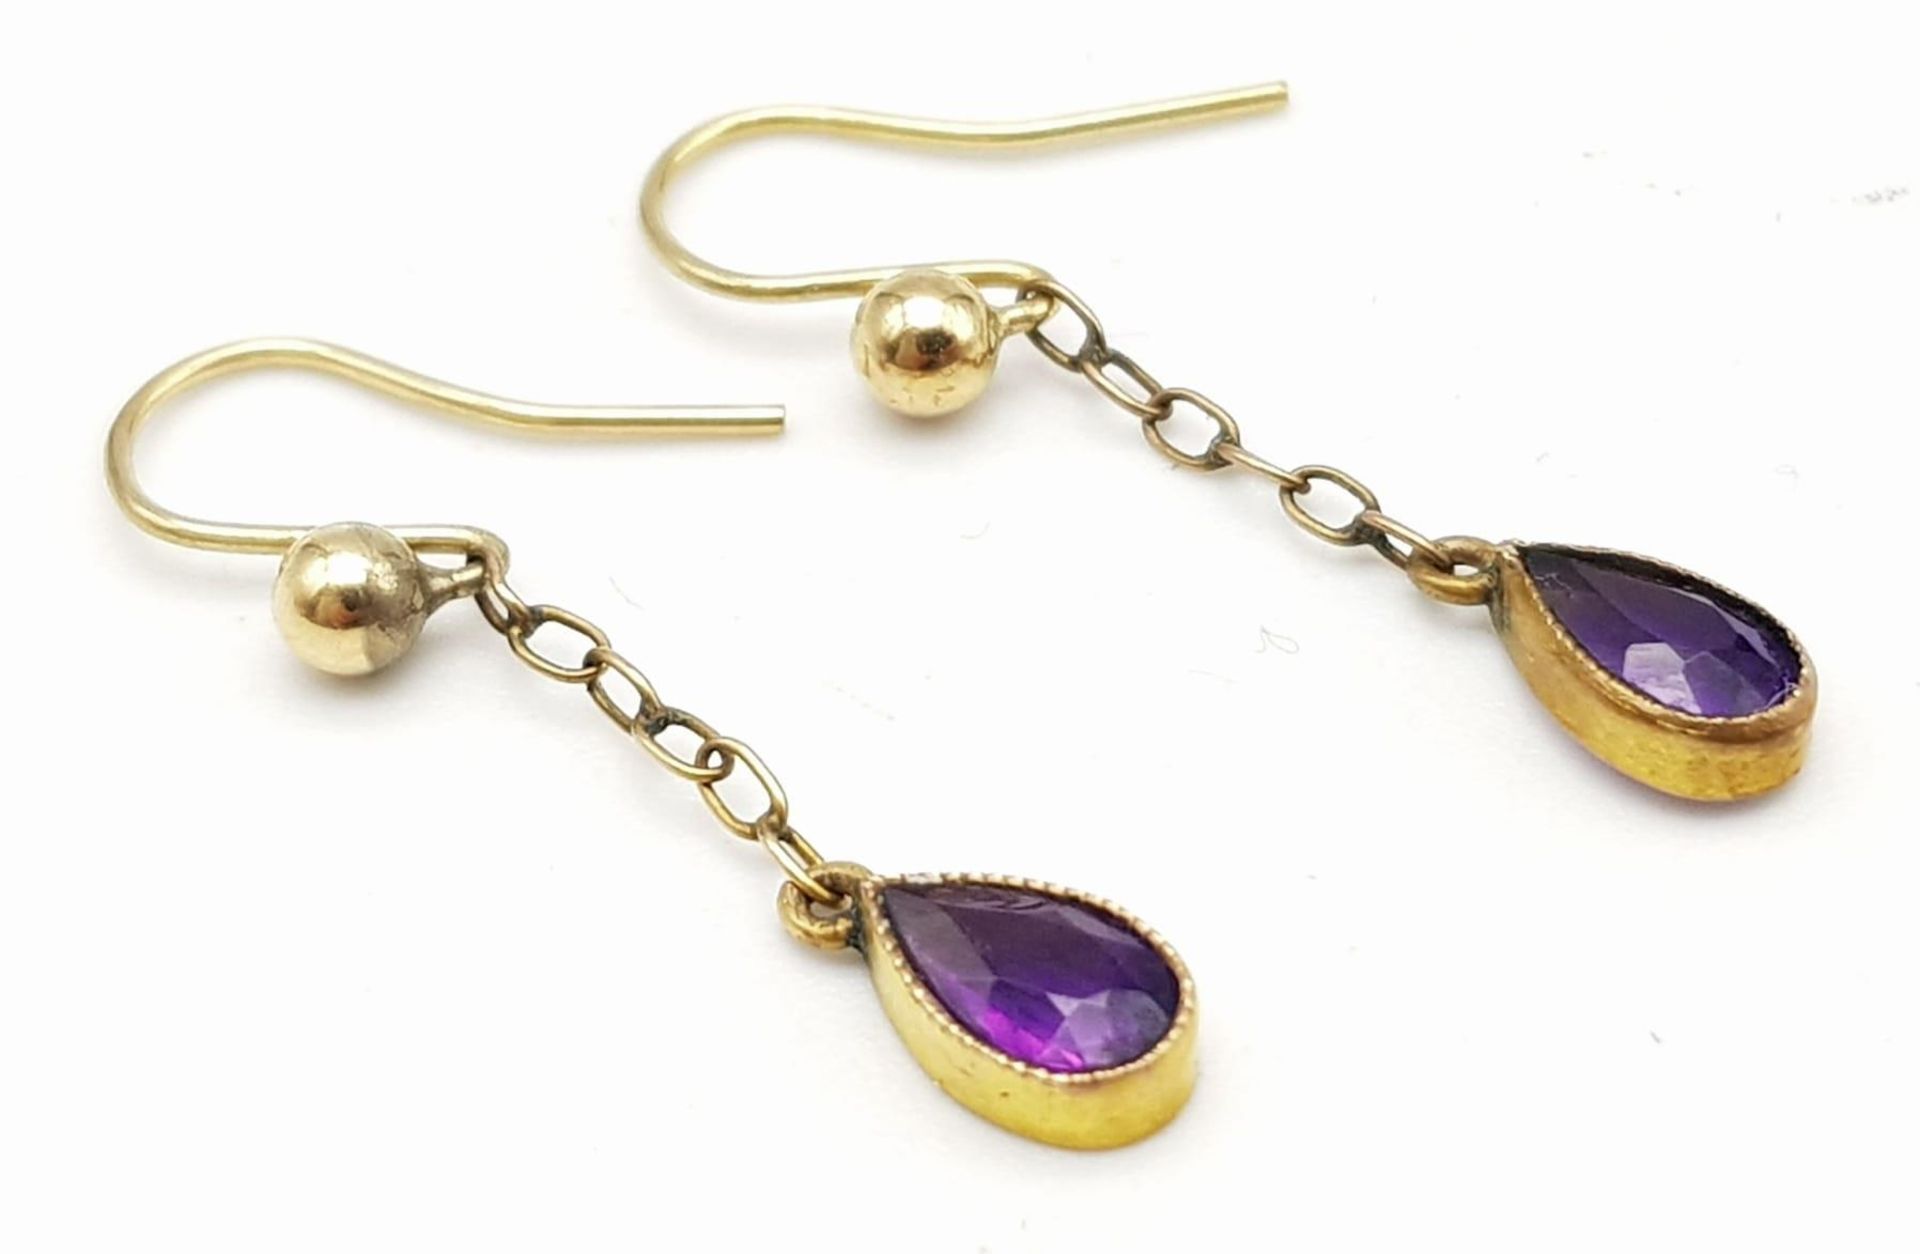 An ART NOUVEAU 9 K yellow gold pendant with vivid coloured amethysts and natural seed pearls, - Image 4 of 7